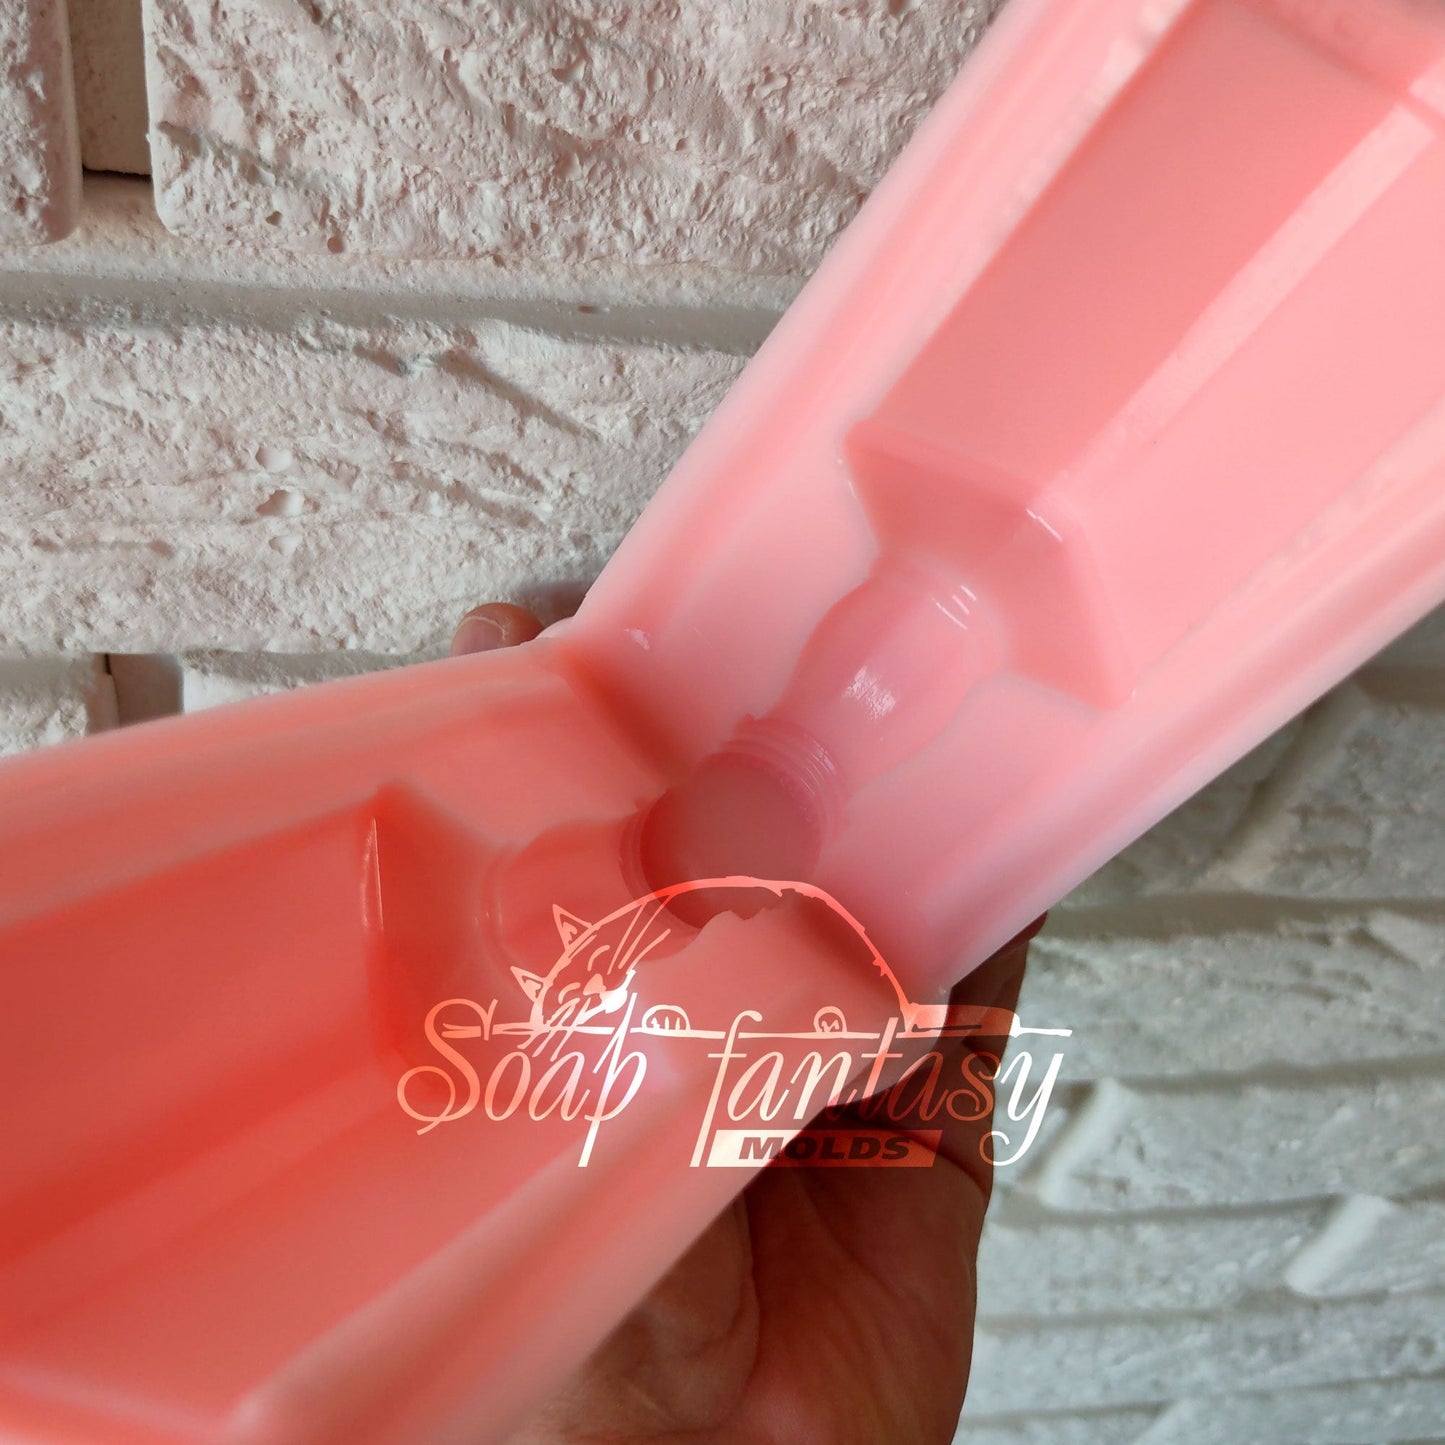 Bottle of whiskey "Square" silicone mold for soap making